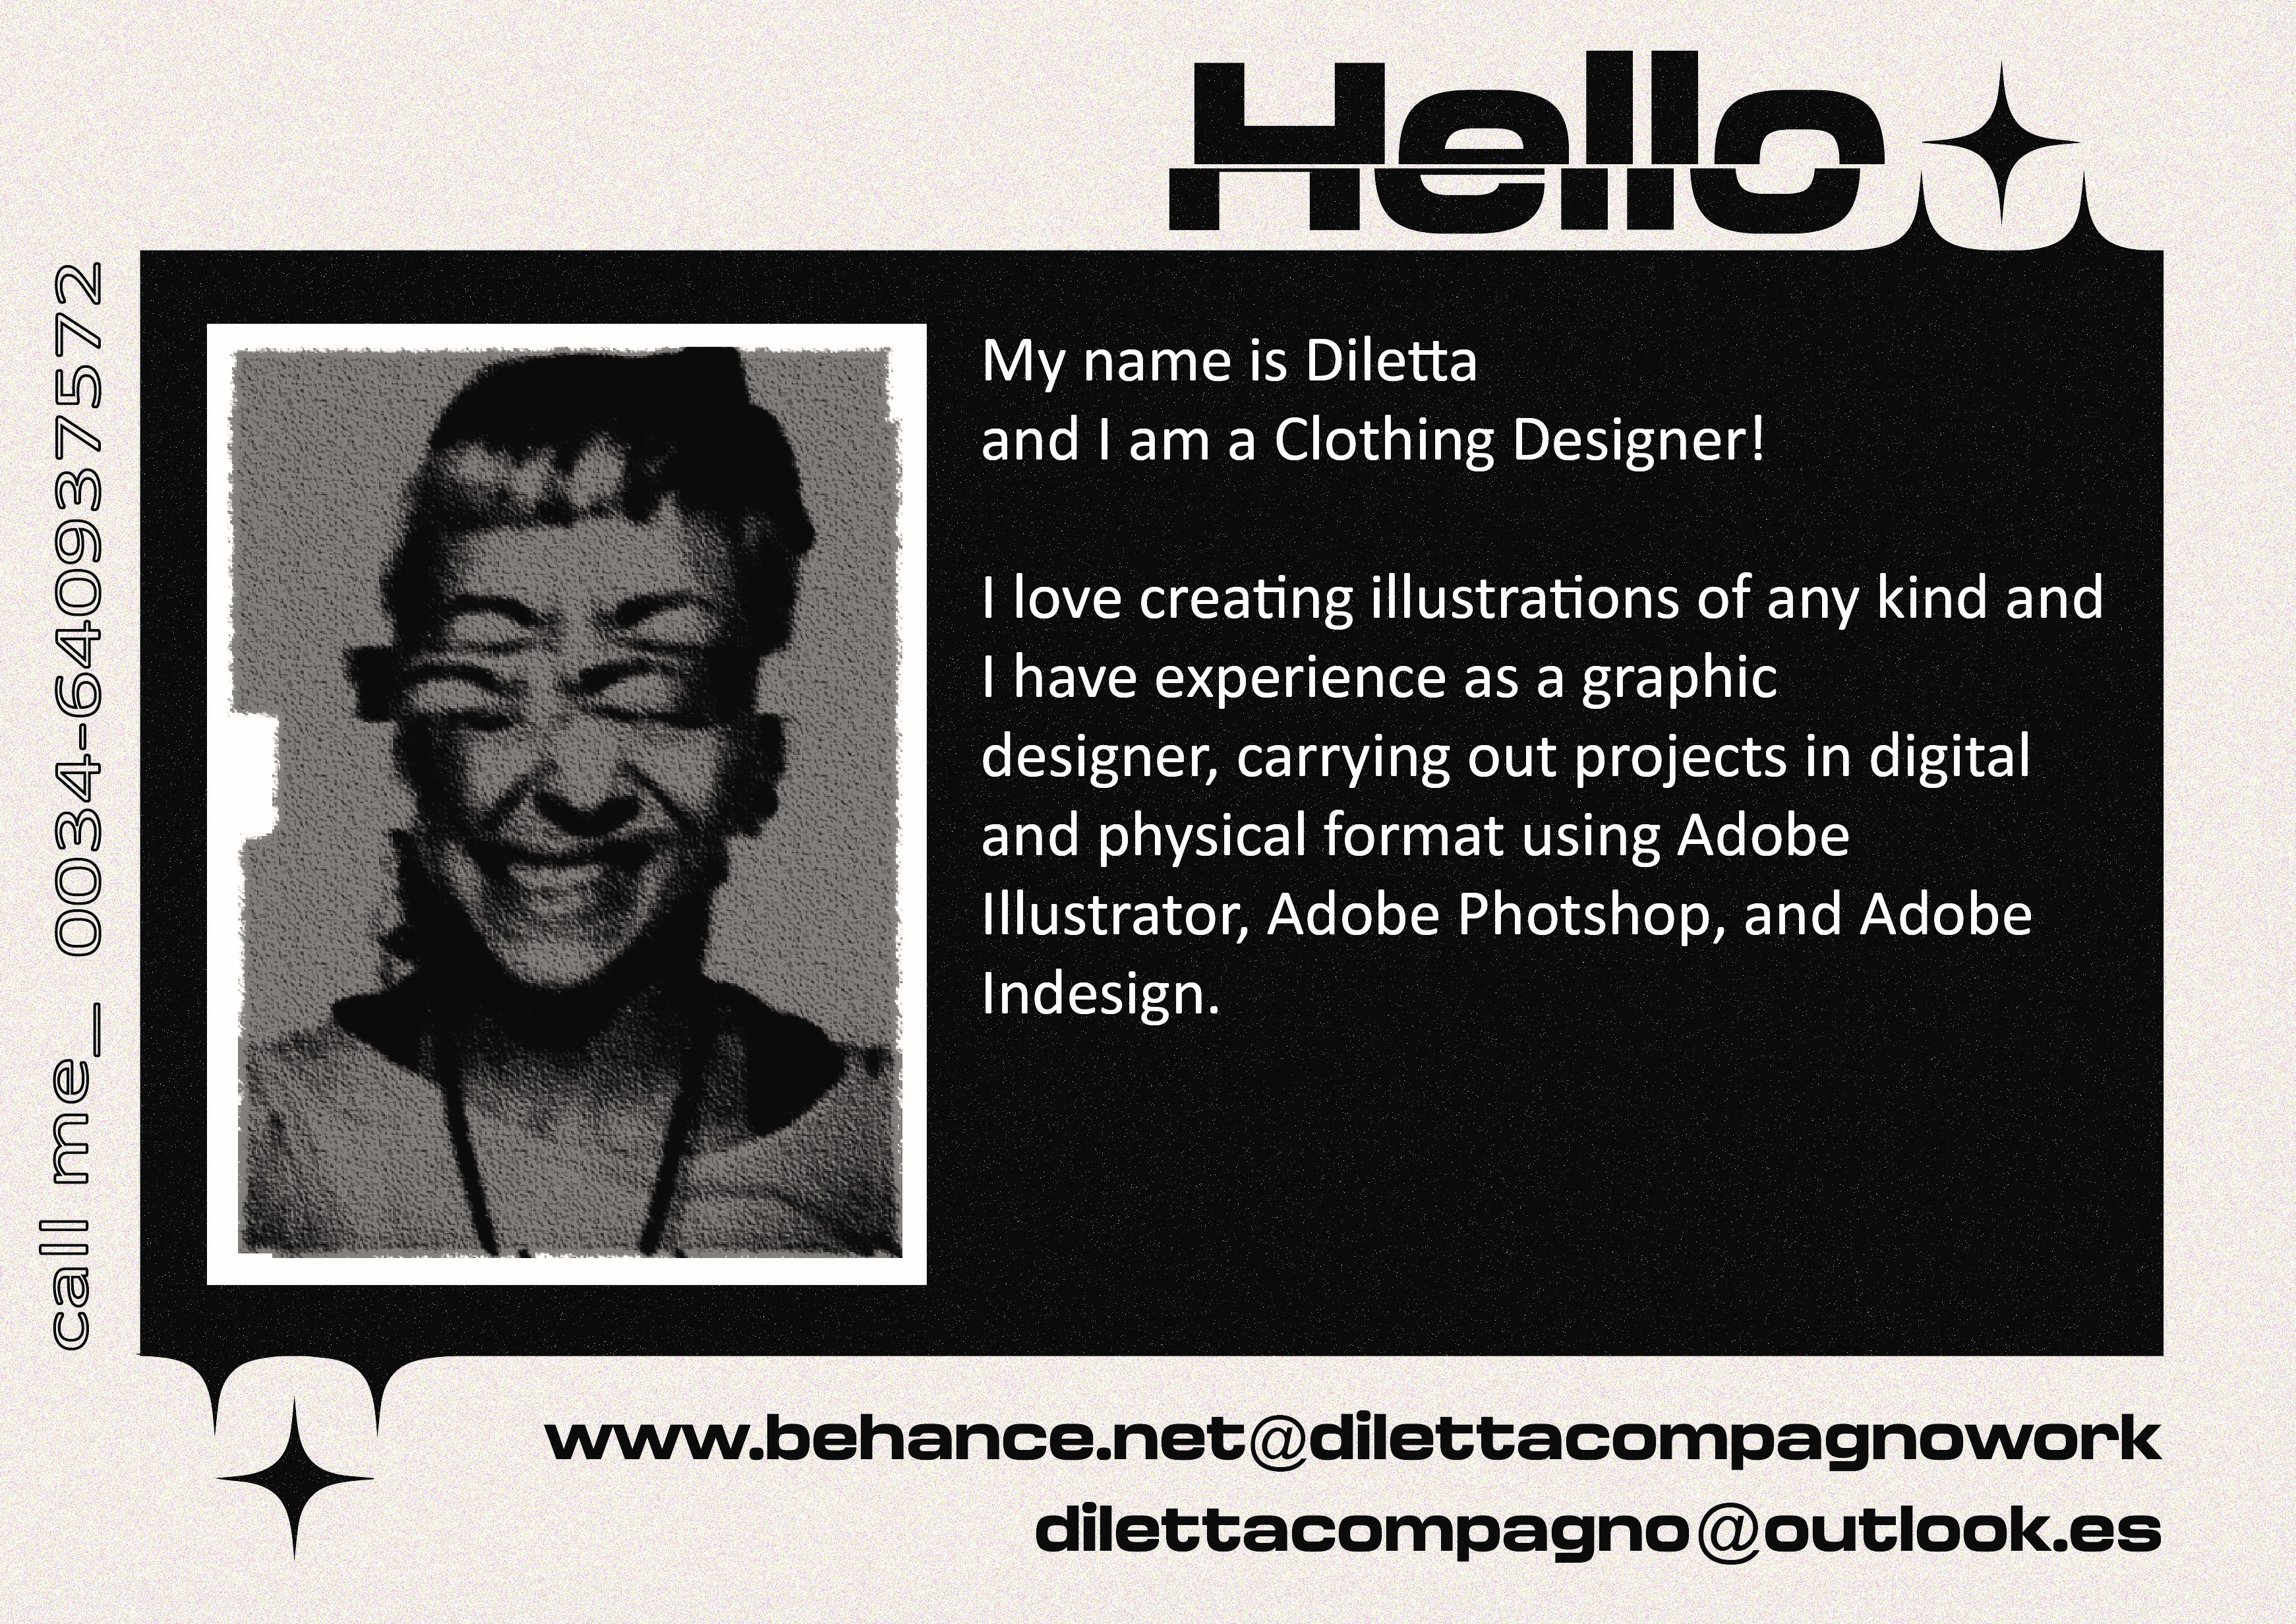 My name is Diletta
and | am a Clothing Designer!

| love creating illustrations of any kind and
| have experience as a graphic

designer, carrying out projects in digital
and physical format using Adobe
Illustrator, Adobe Photshop, and Adobe
Indesign.

N
N
1
N
0
a
0
ST
5
ST
mM
0
©
®
&amp;
®
©

www.behance.net@dilettacompagnowork
dilettacompagno@outlook.es